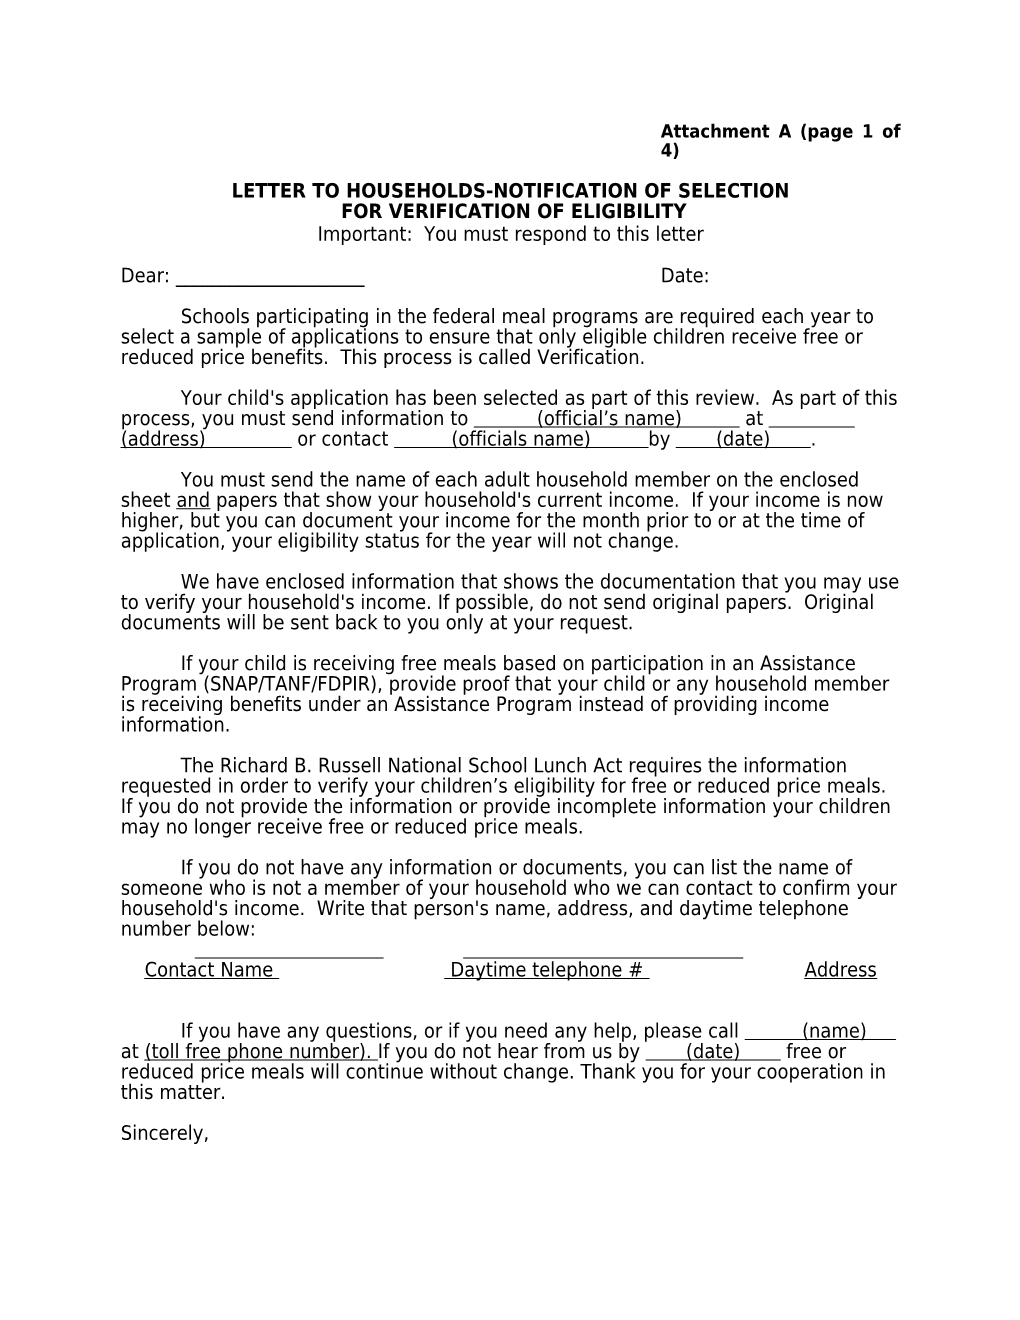 Letter to Households-Notification of Selection